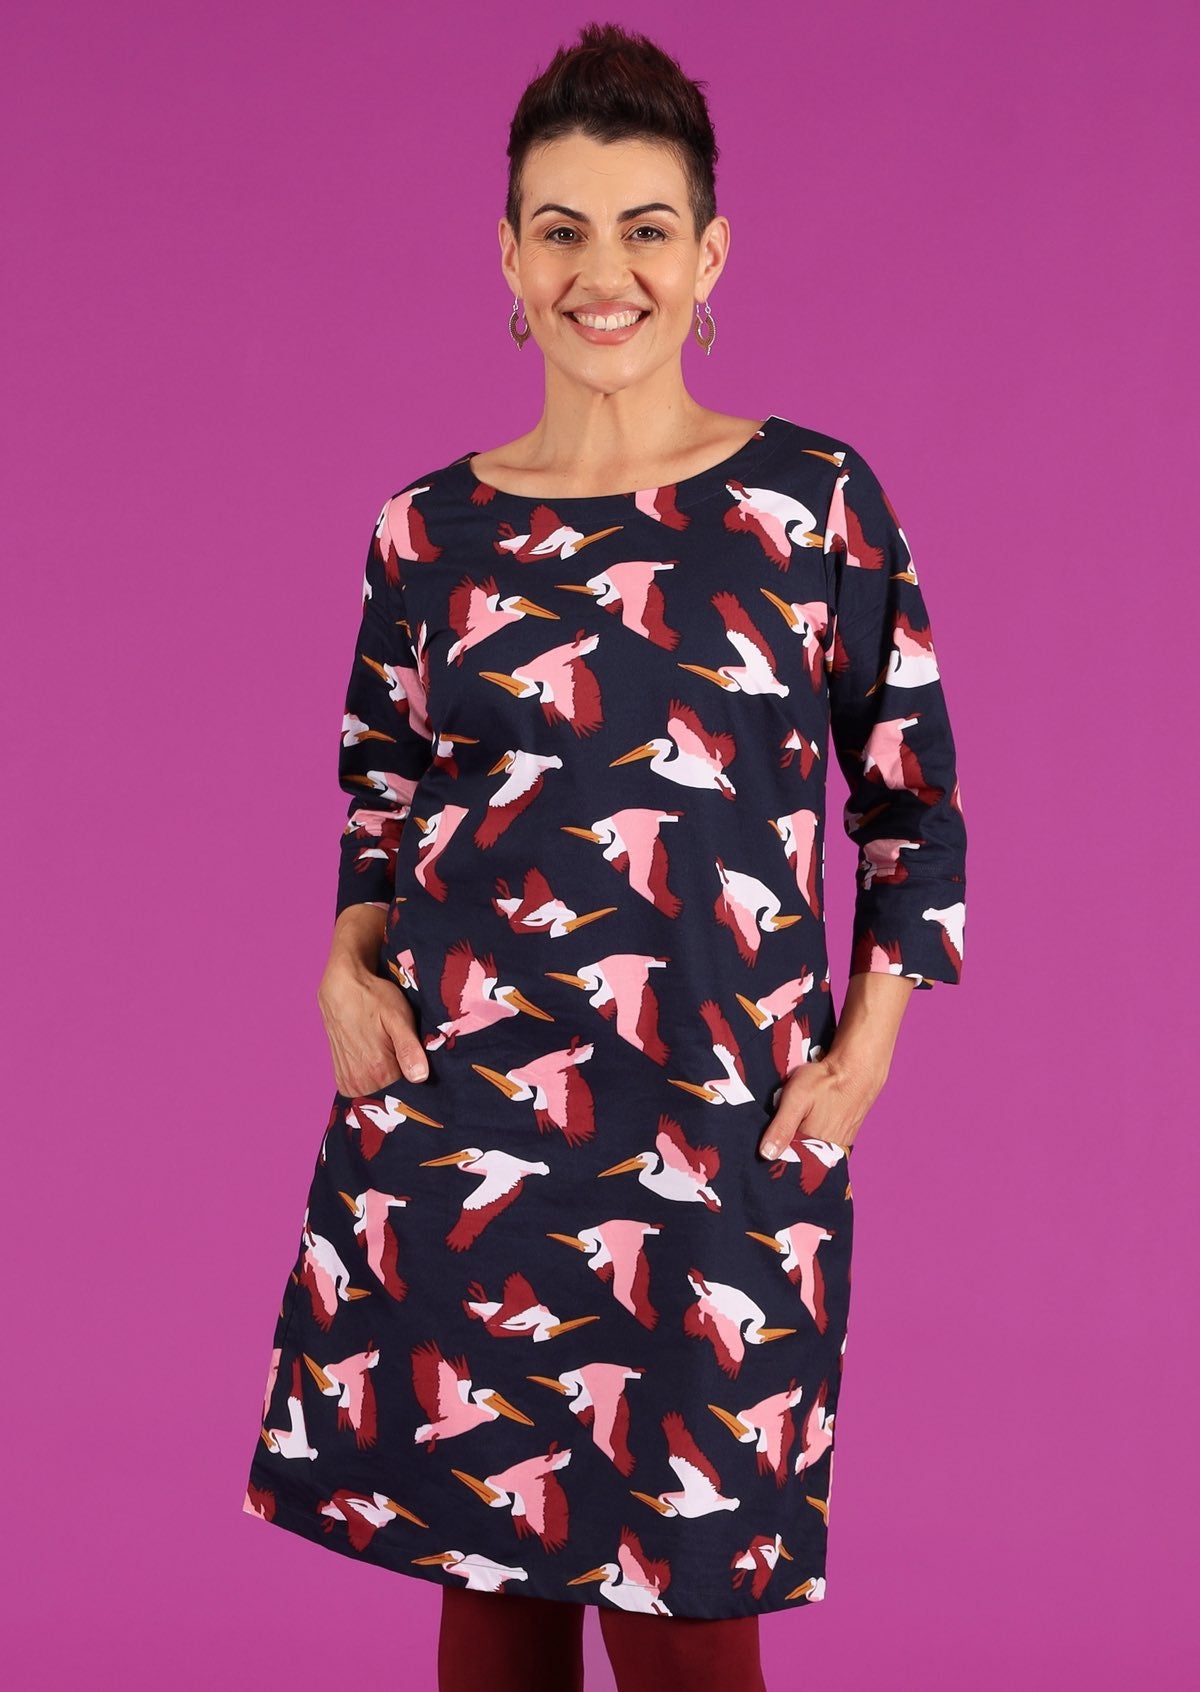 Jamie Dress round neck 3/4 sleeve cuff detail fitted bodice a-line skirt pockets knee length 100% cotton navy background maroon pink and white pelican print | Karma East Australia